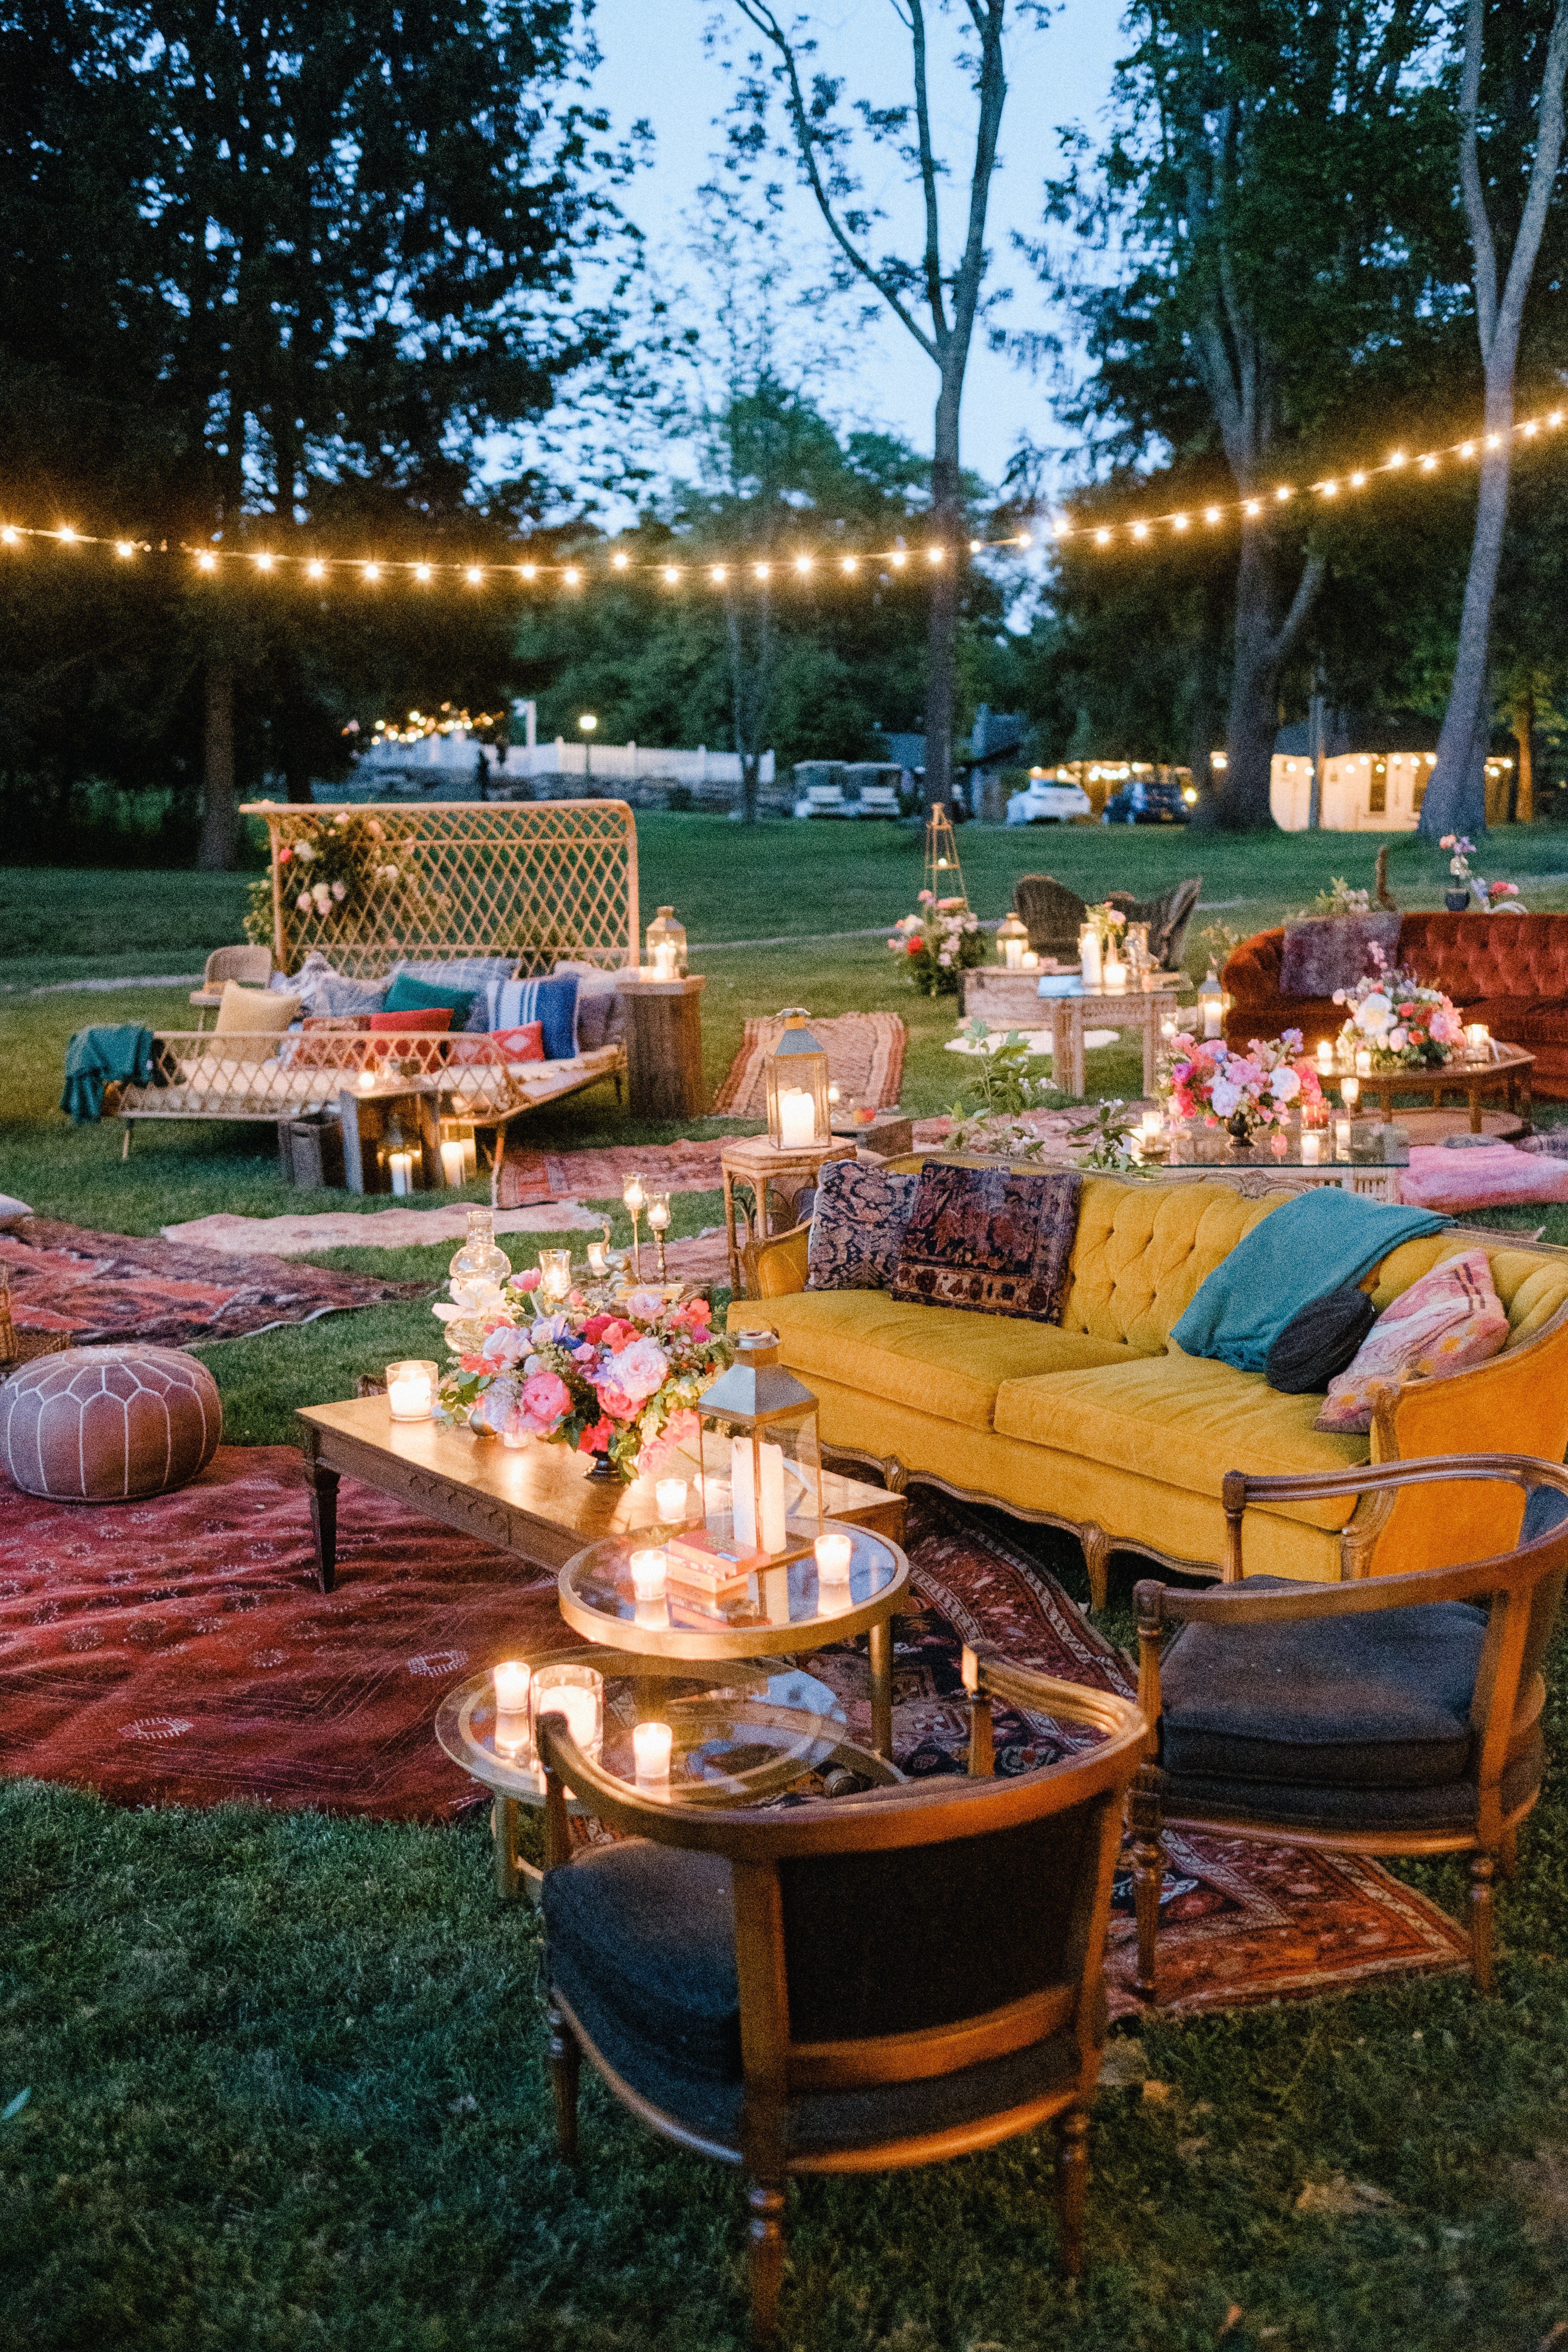 12 Some of the Coolest Initiatives of How to Upgrade Backyard Bbq Engagement Party Ideas -   17 wedding Backyard bbq ideas